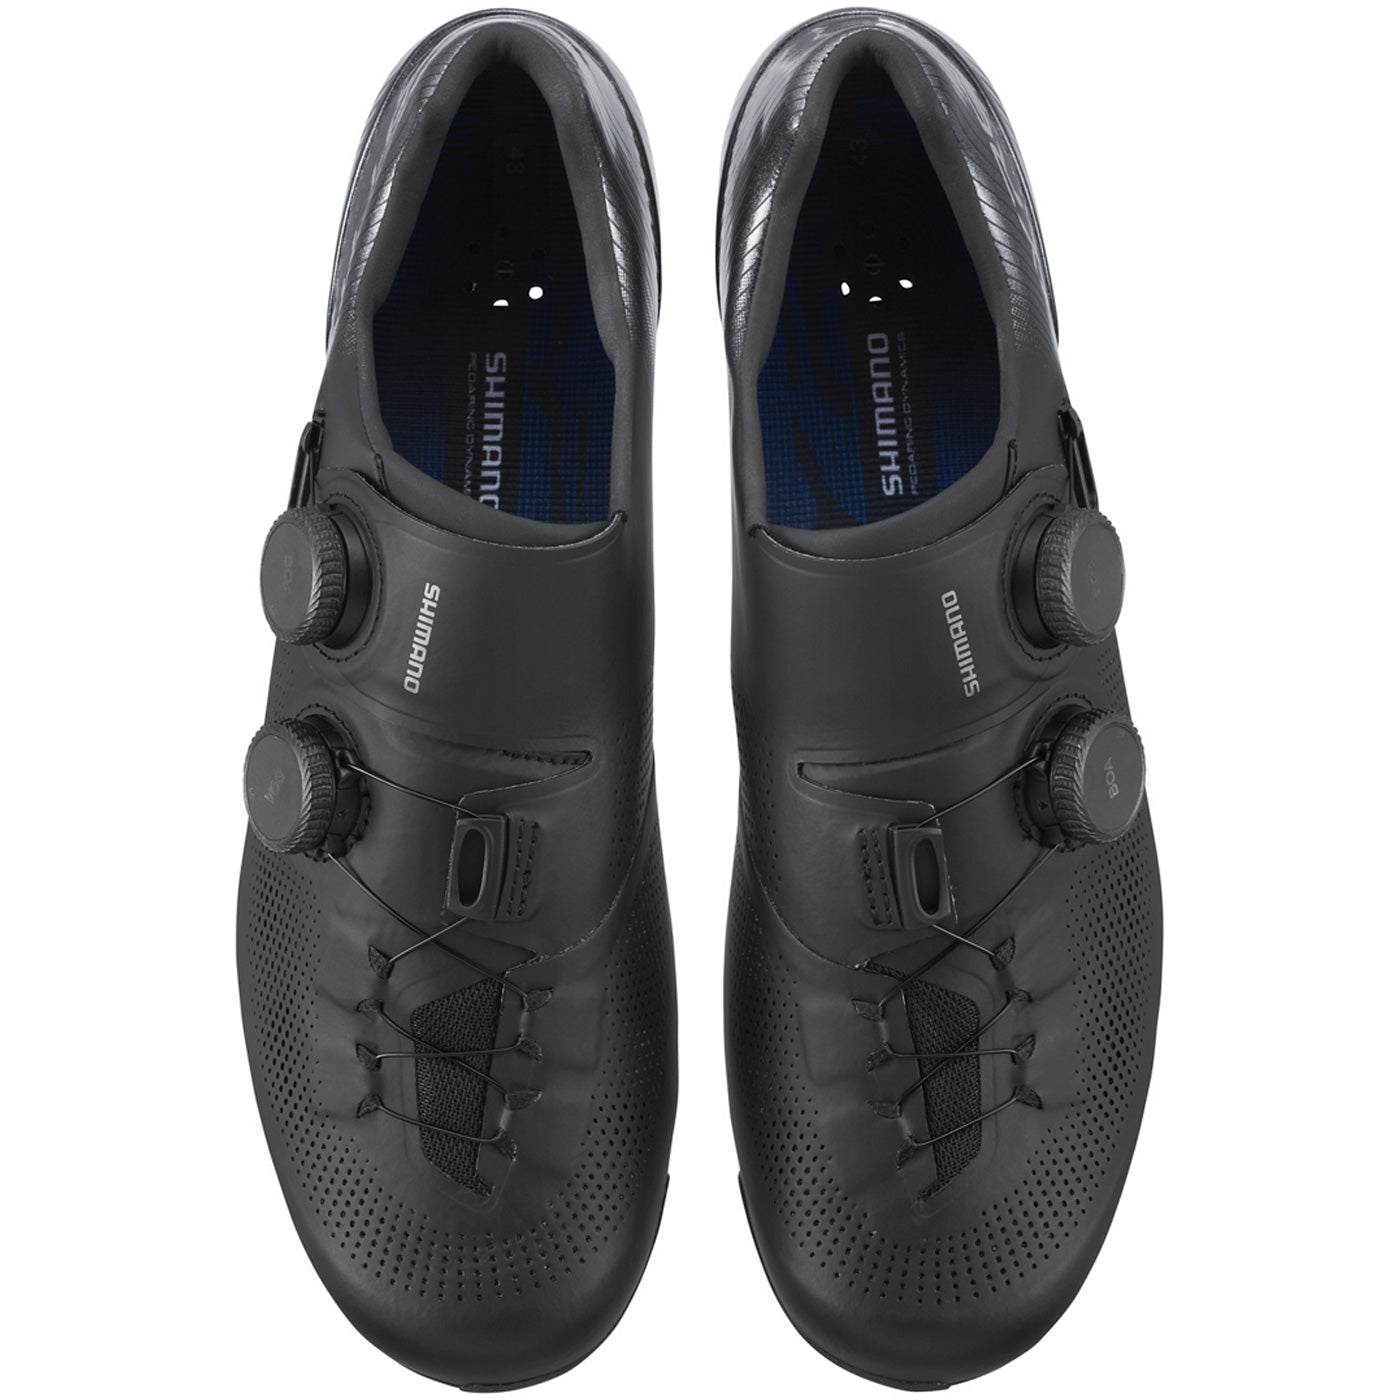 Chaussures Shimano S-Phyre RC903 Wide - Noir